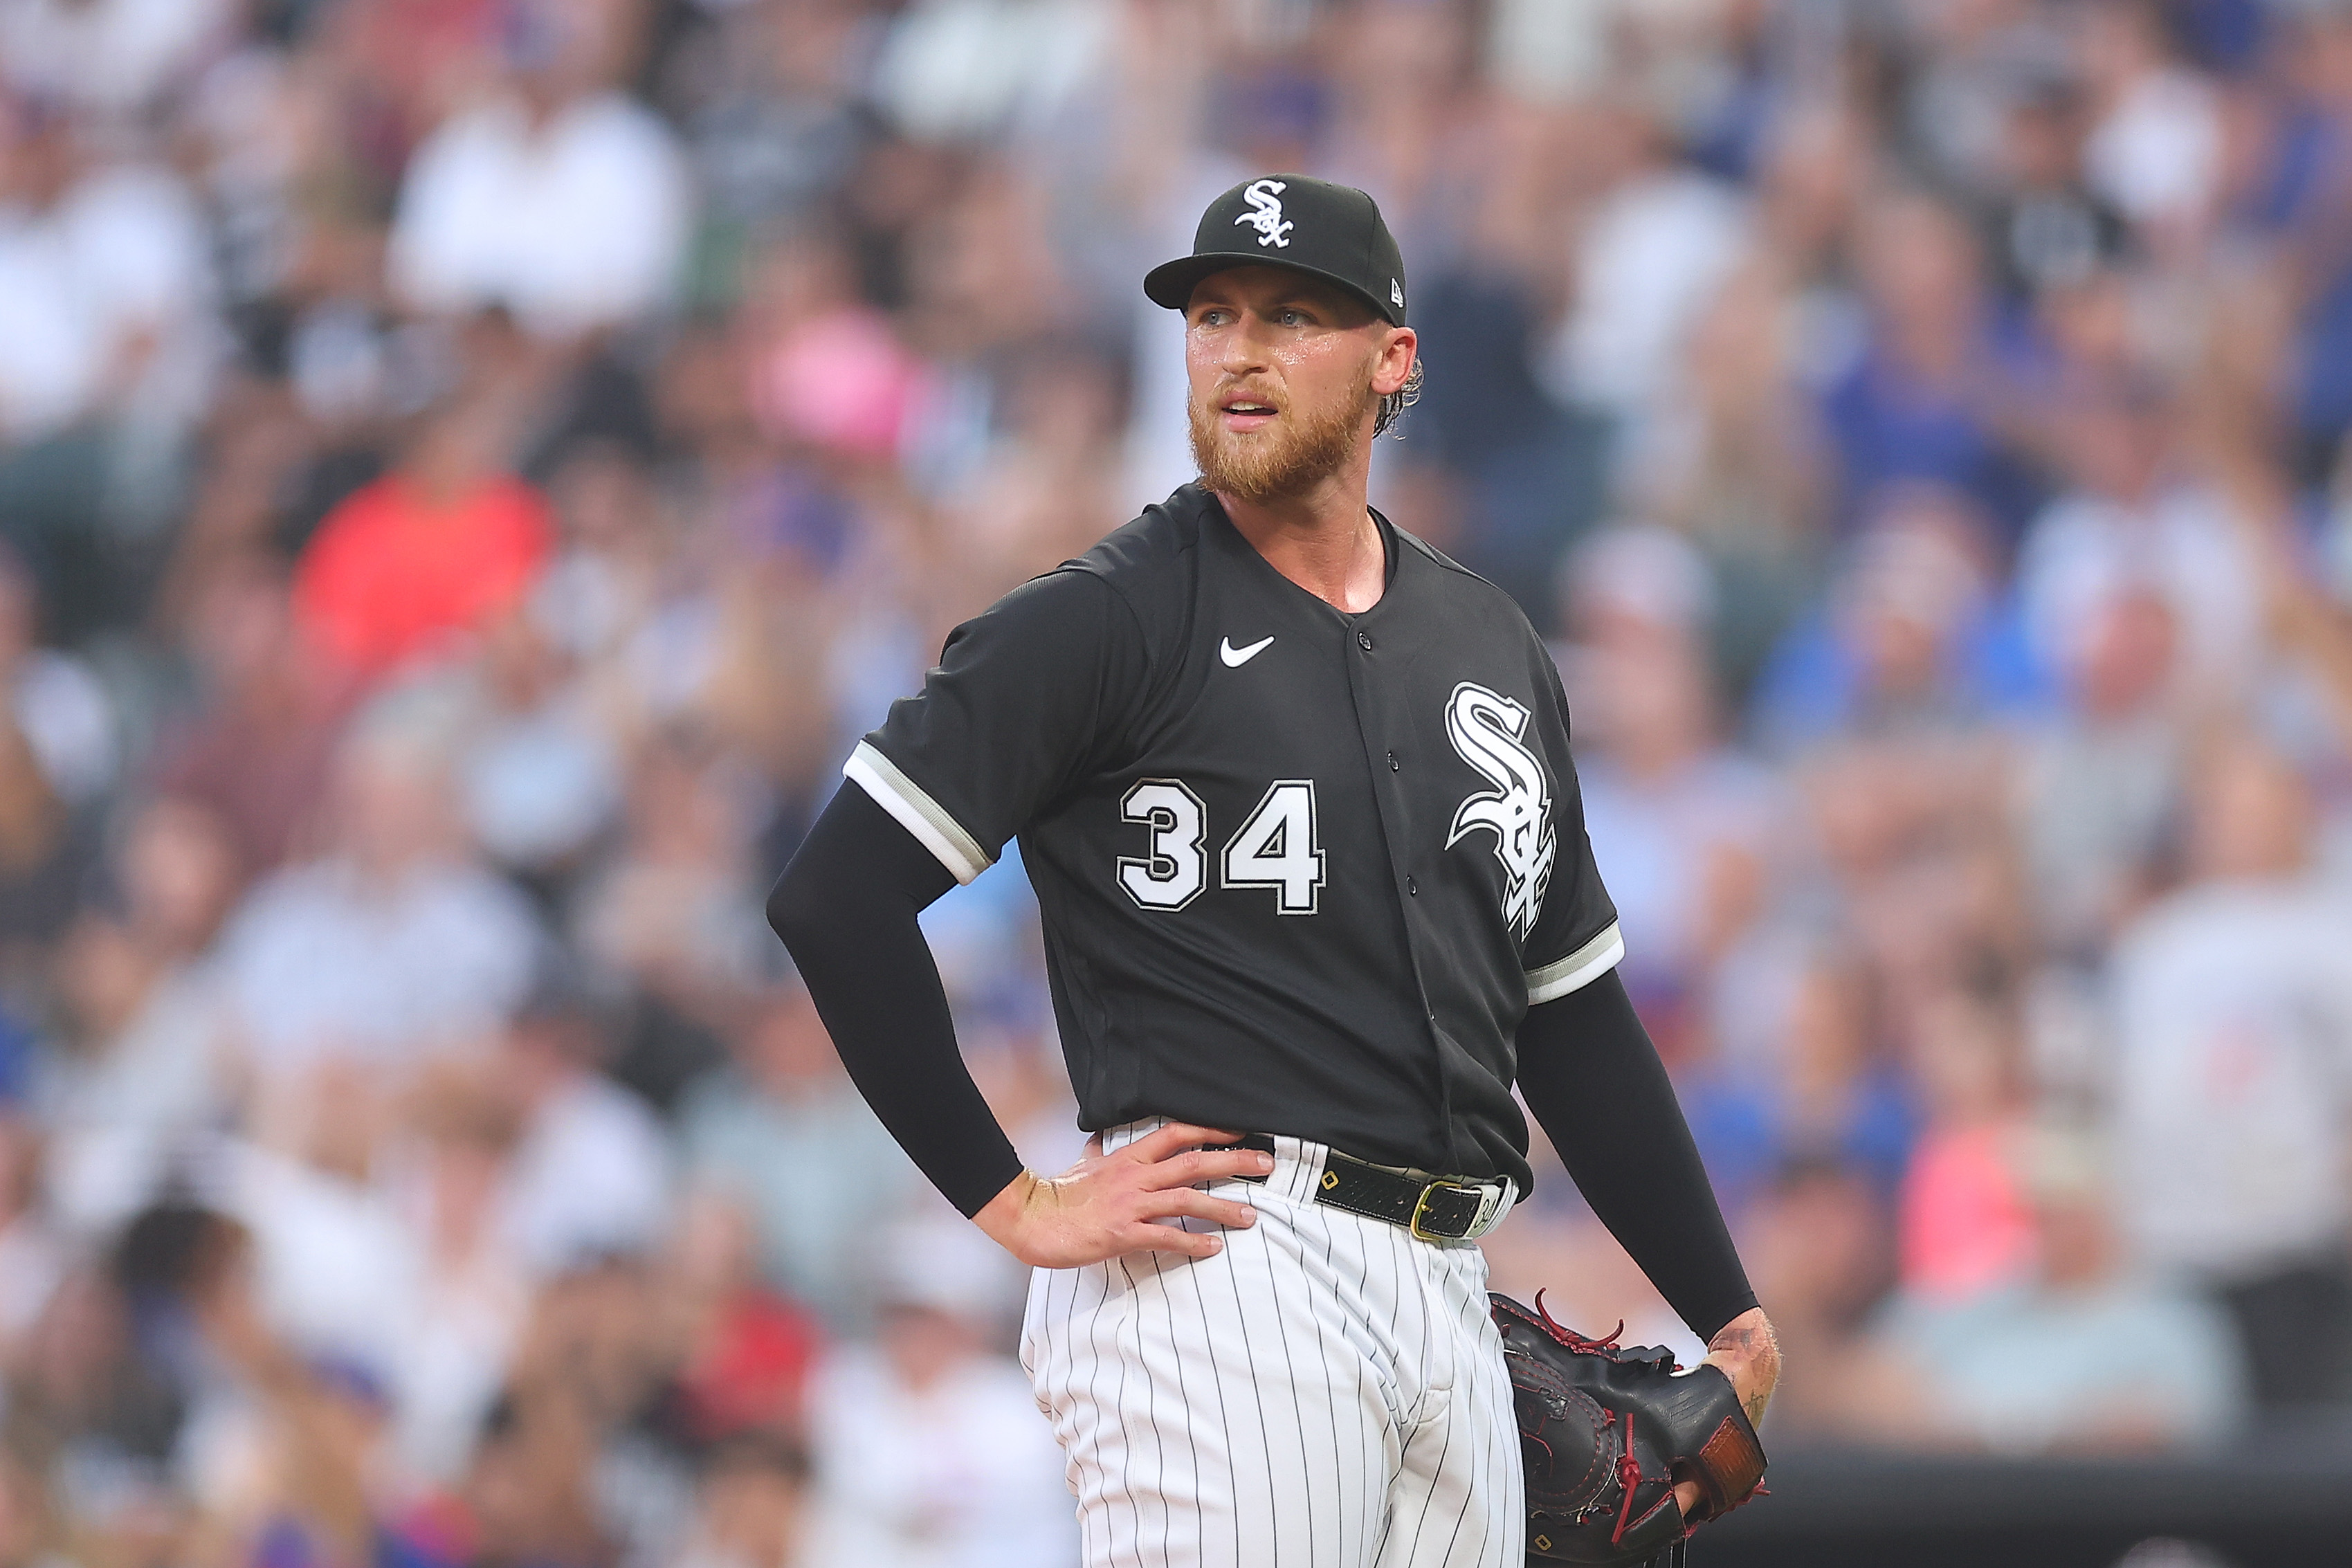 White Sox lose Kopech, then the game in Kansas City